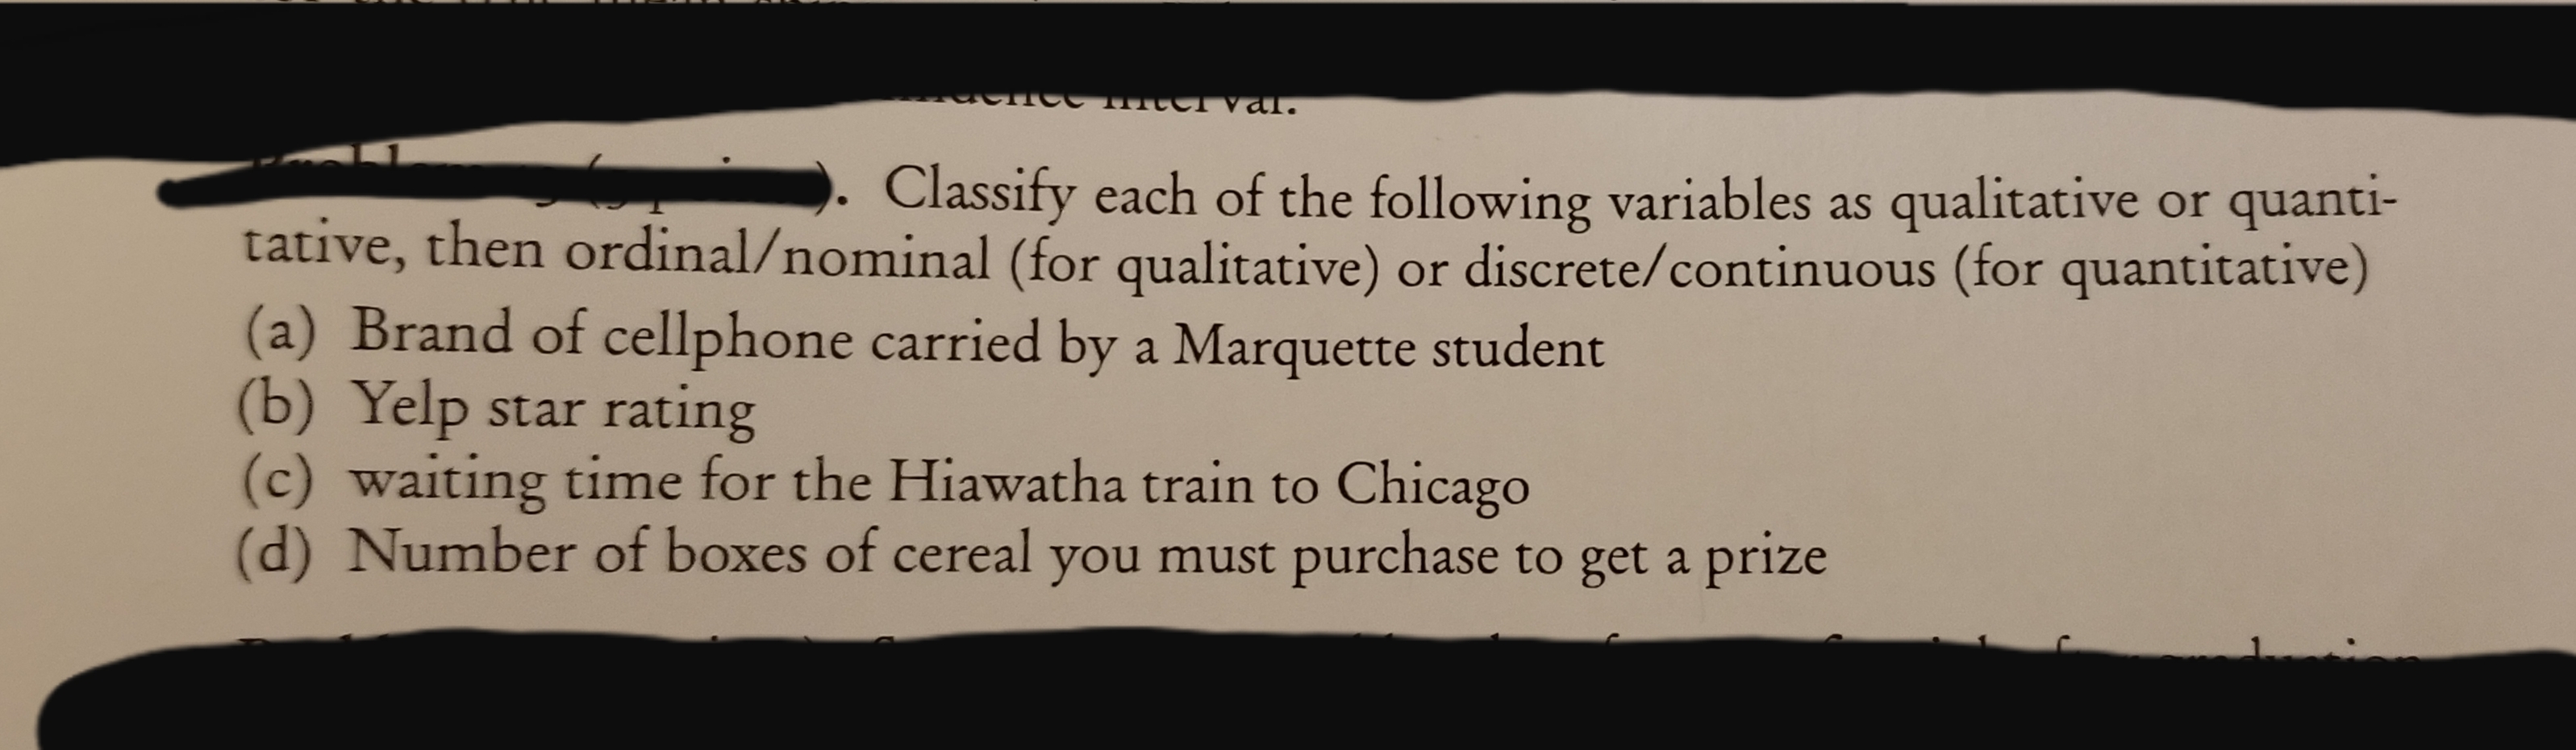 terval.
Classify each of the following variables as qualitative or quanti-
tative, then ordinal/nominal (for qualitative) or discrete/continuous (for quantitative)
(a) Brand of cellphone carried by a Marquette student
(b) Yelp star rating
(c) waiting time for the Hiawatha train to Chicago
(d) Number of boxes of cereal you must purchase to get a prize
